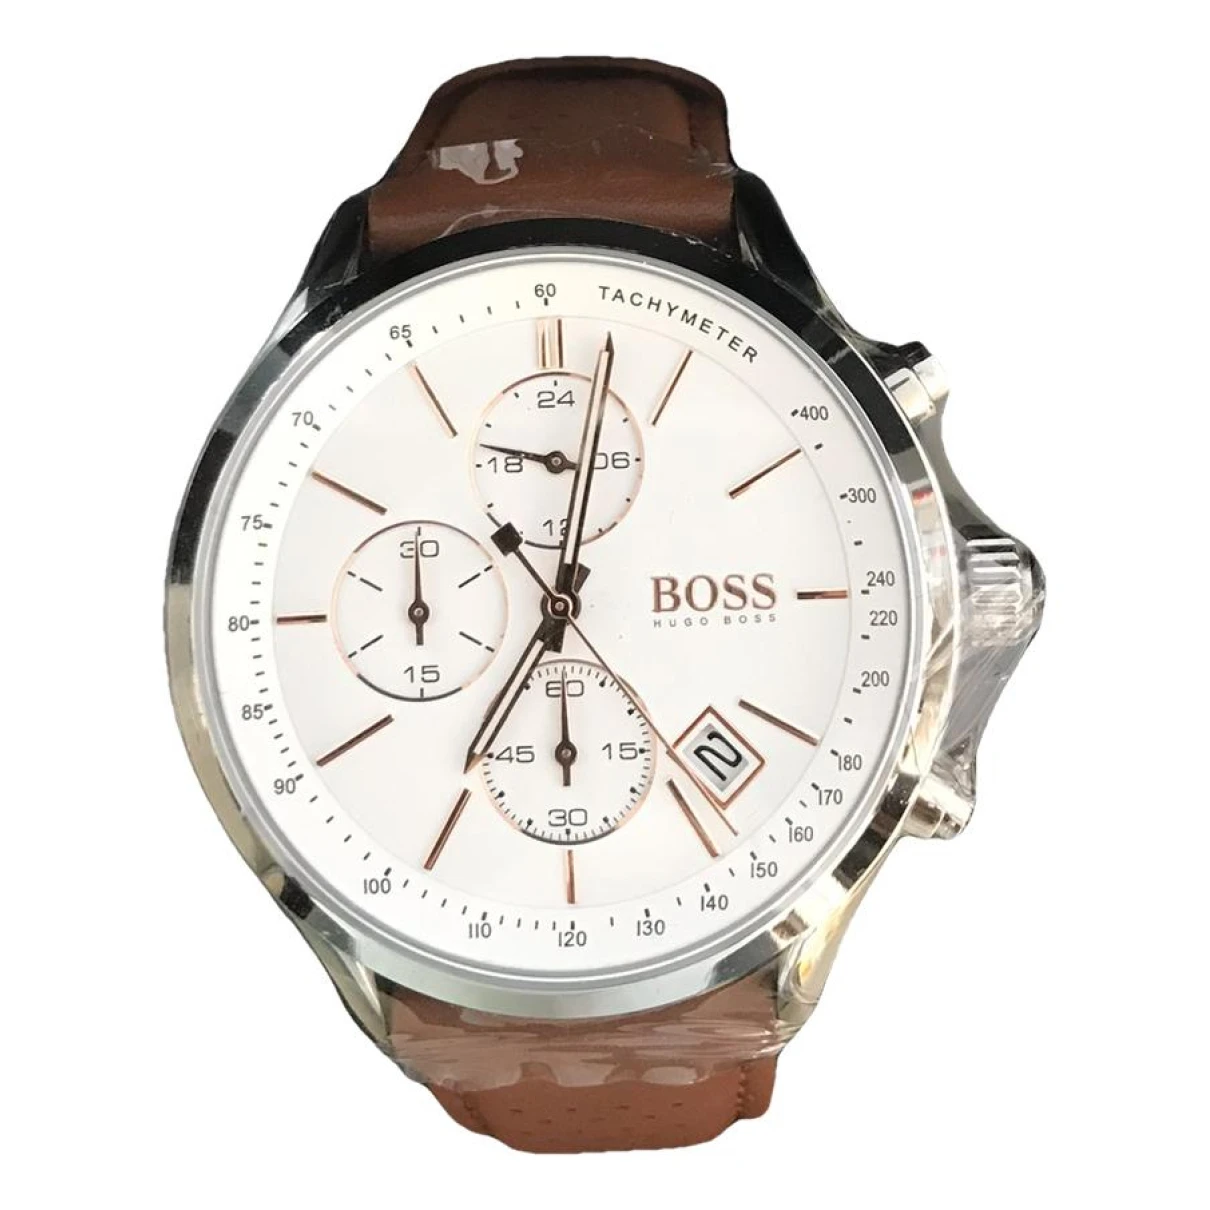 Pre-owned Hugo Boss Watch In Gold